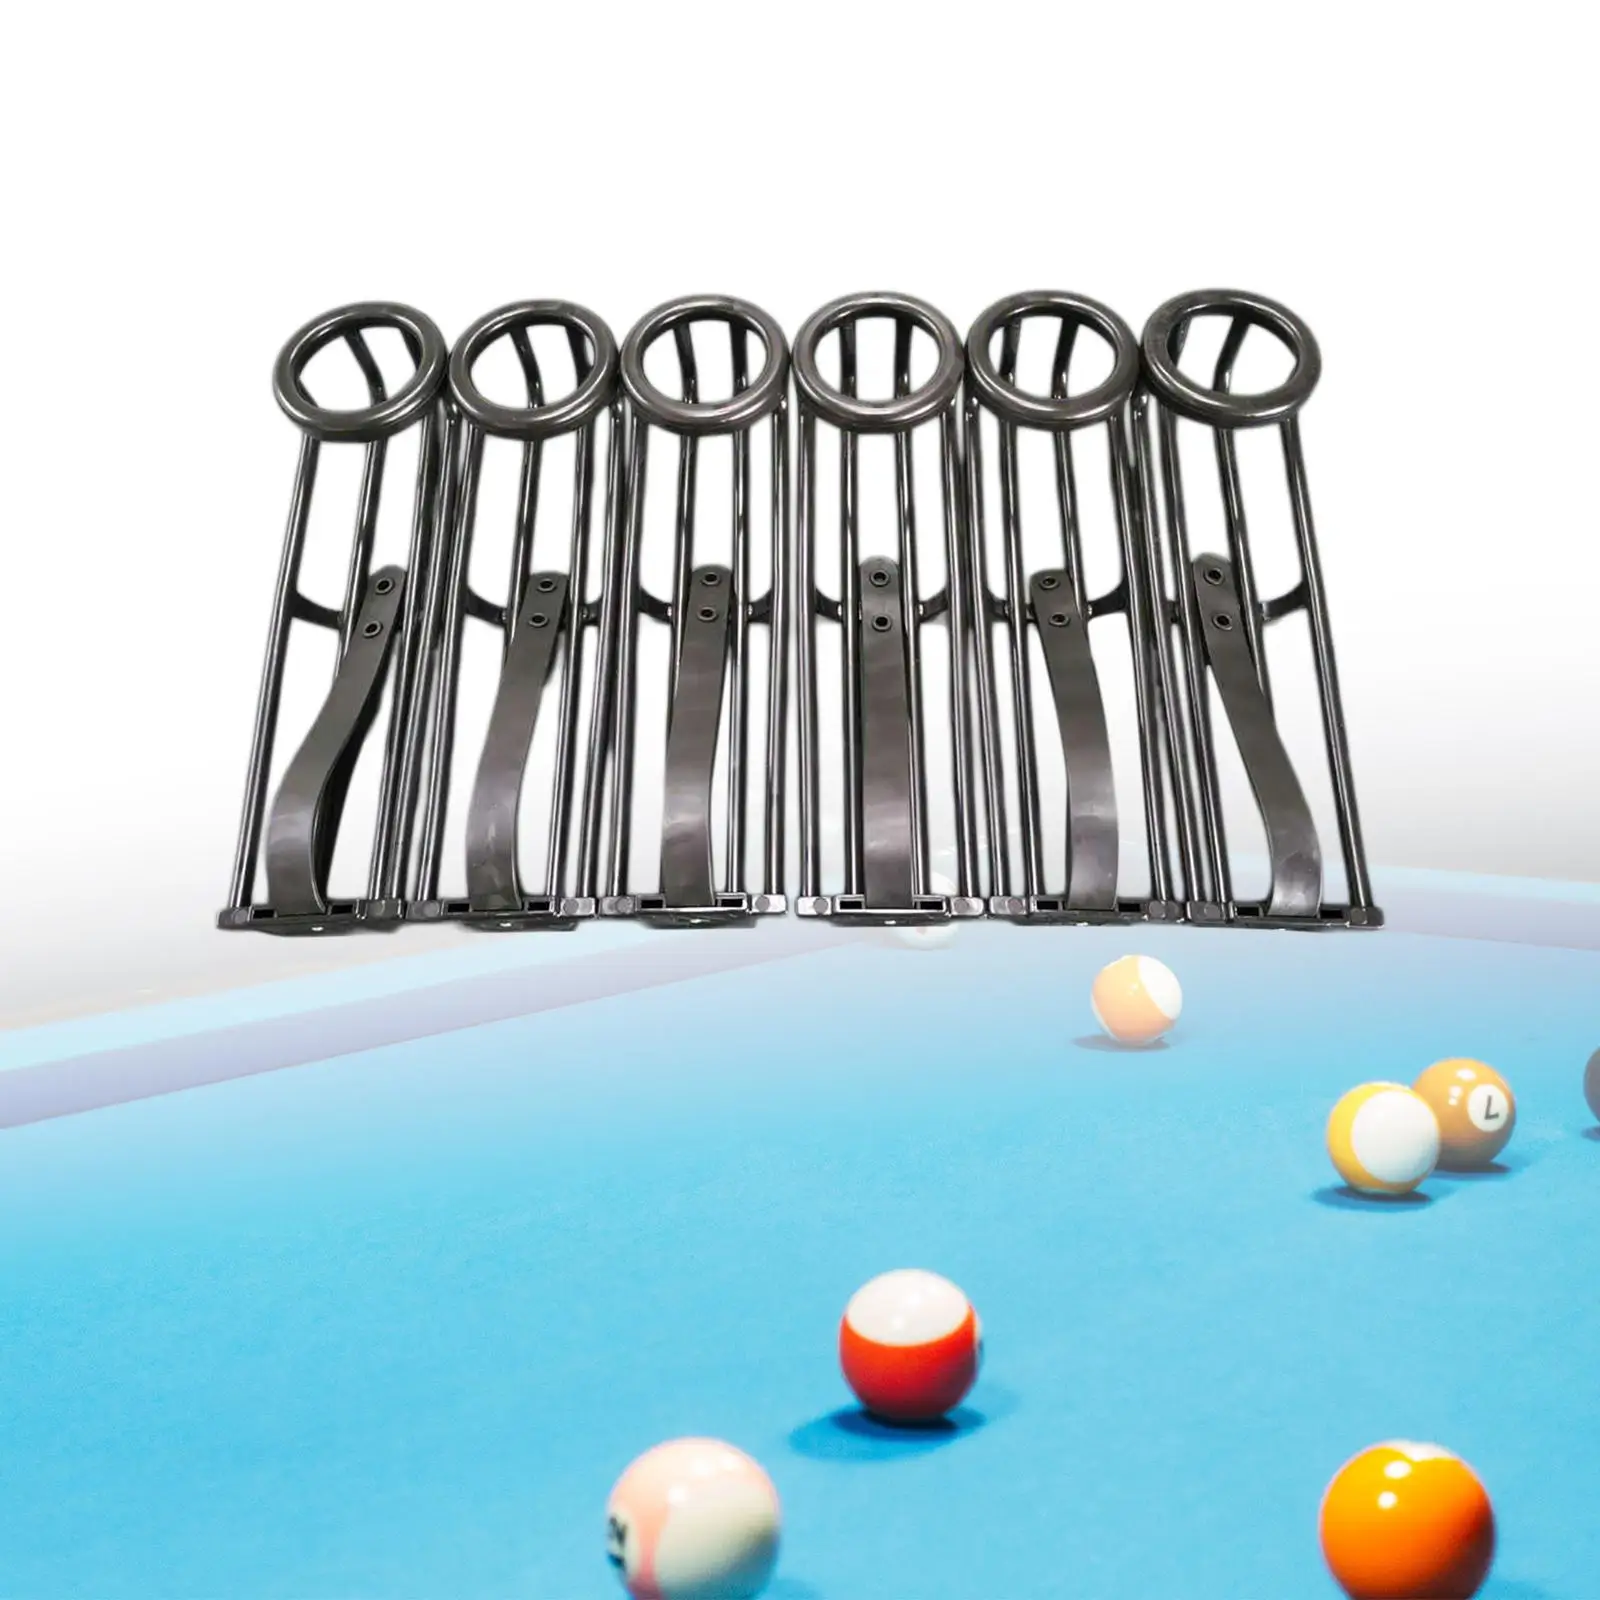 6 Pieces Billiards Table Pocket Rail Replace, Chinese Billiards Table Slide Track